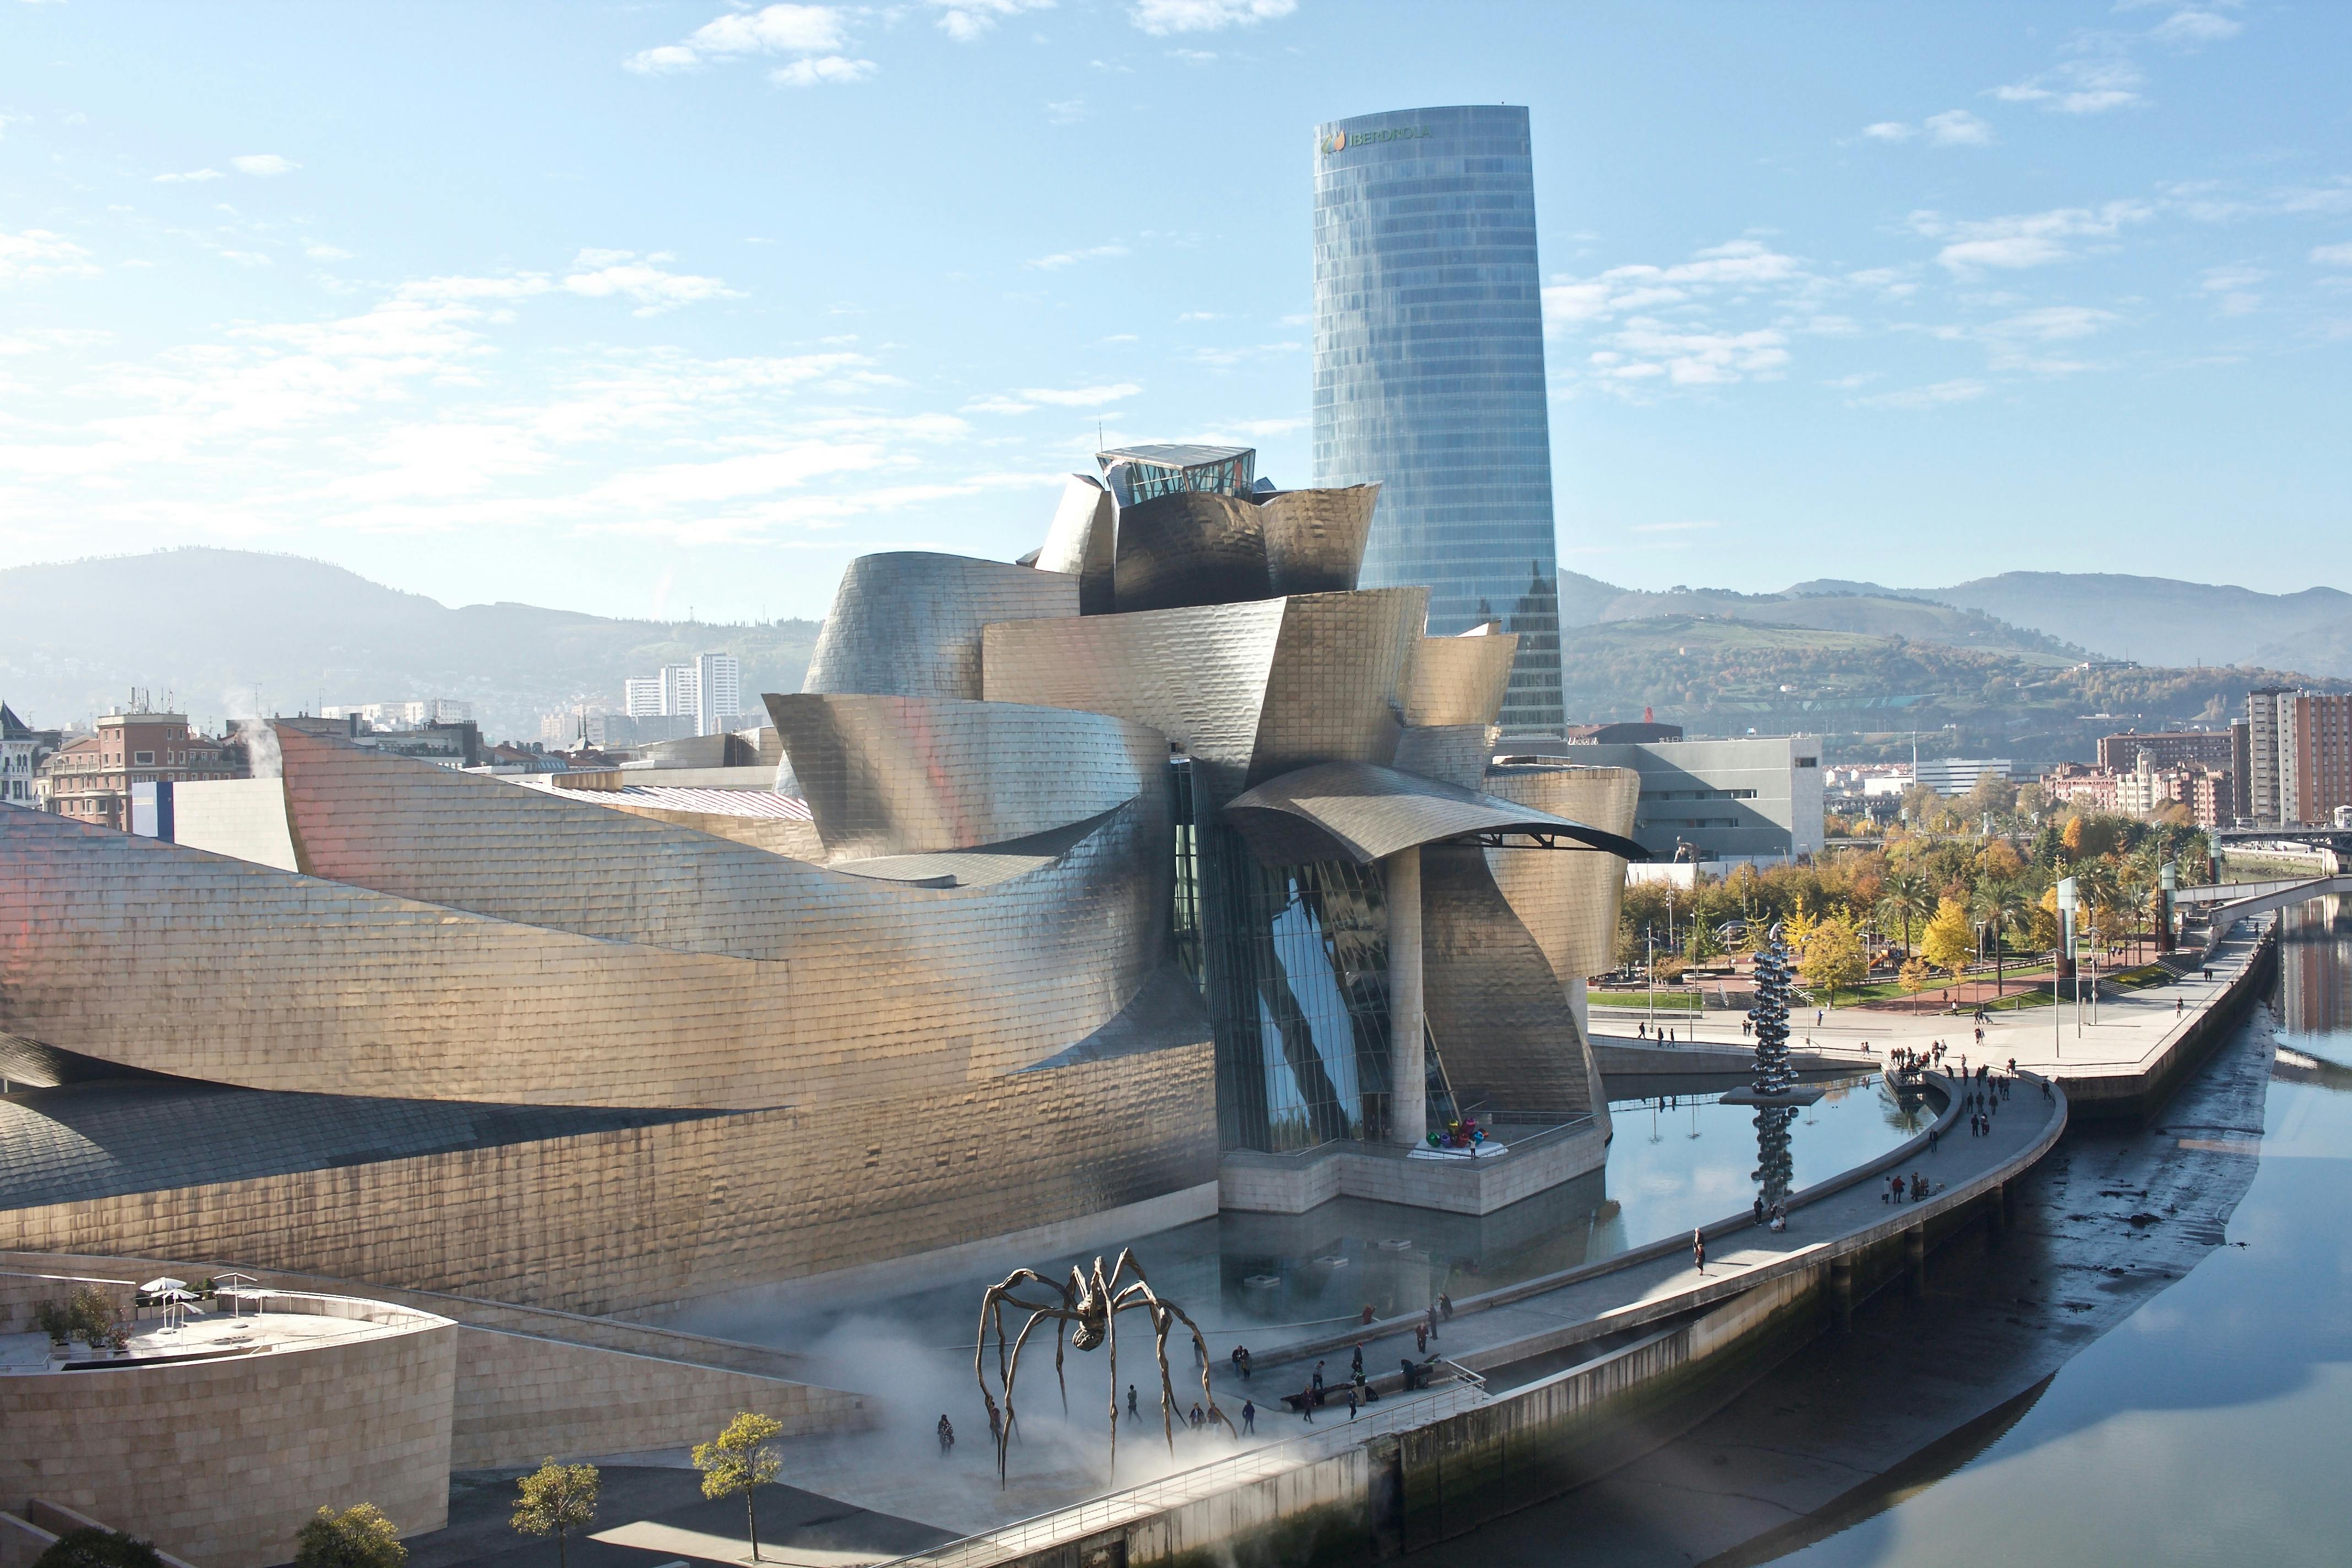 All Iron Bilbao tour: Athletic Club y Museo Guggenheim